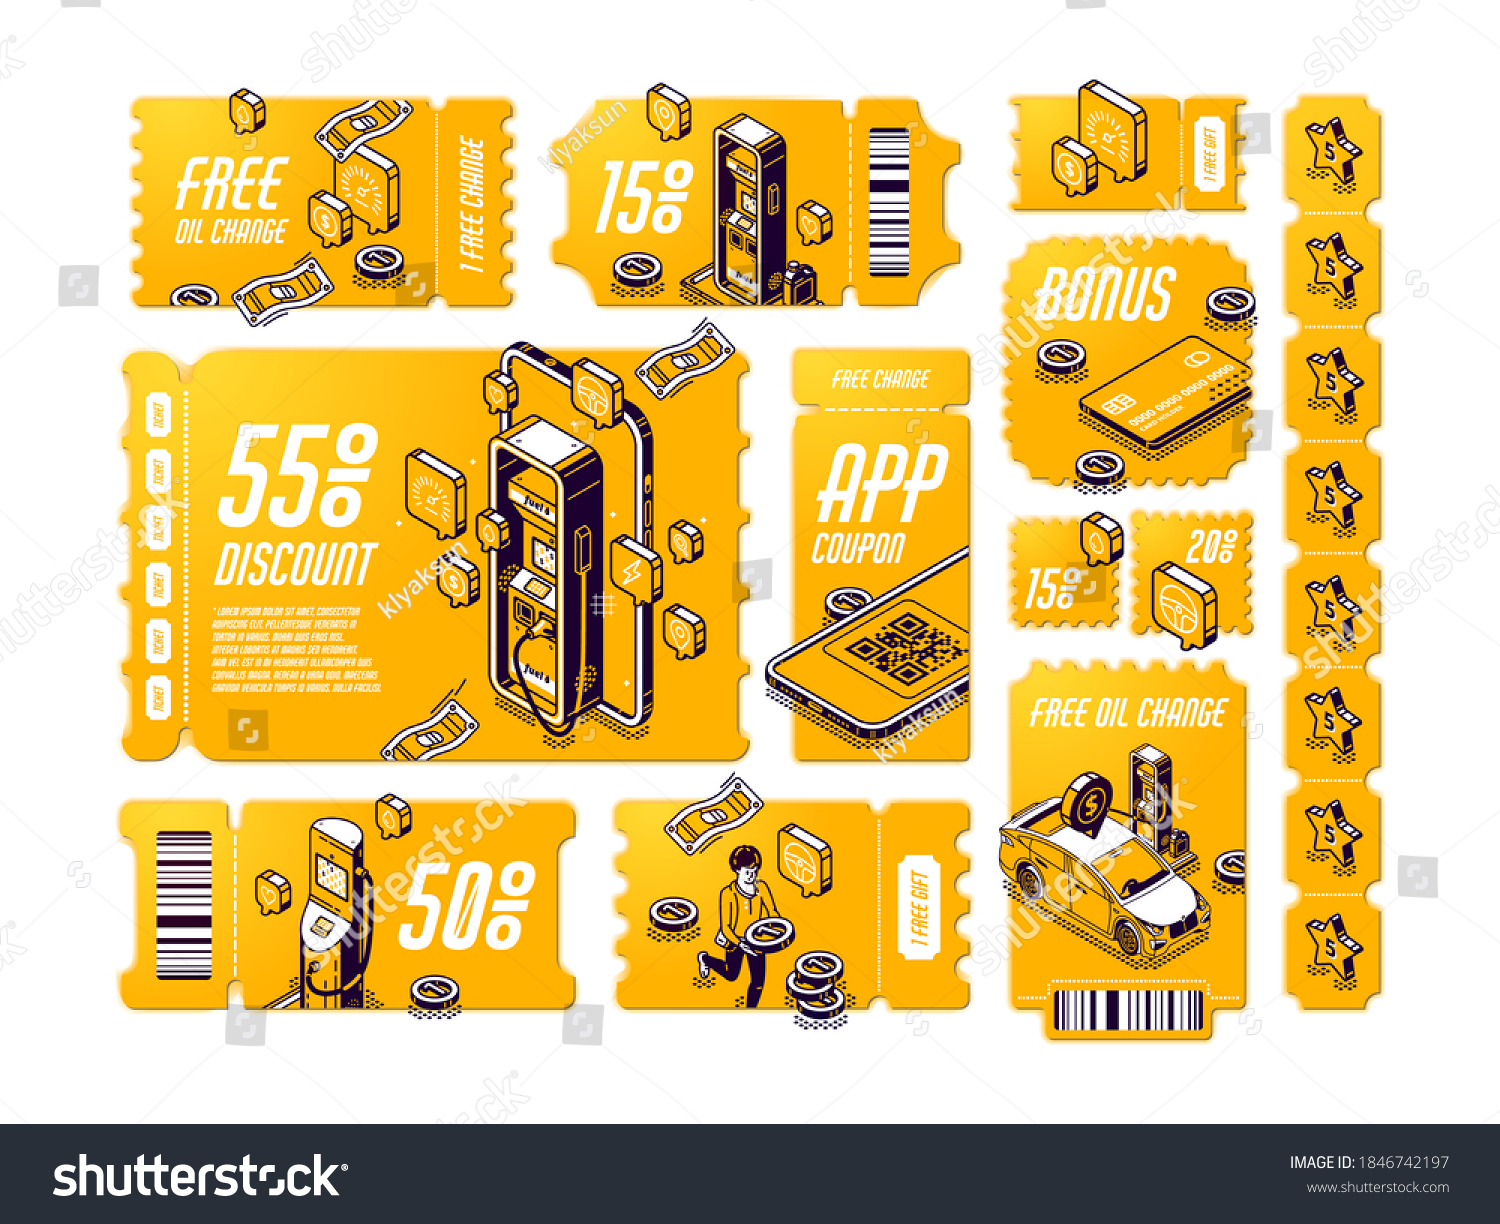 SVG of Isometric discount coupons for free oil change, tear-off gift vouchers for car service, off price certificates with gas station and coins, 3d vector line art tickets, offer for vehicle maintenance set svg